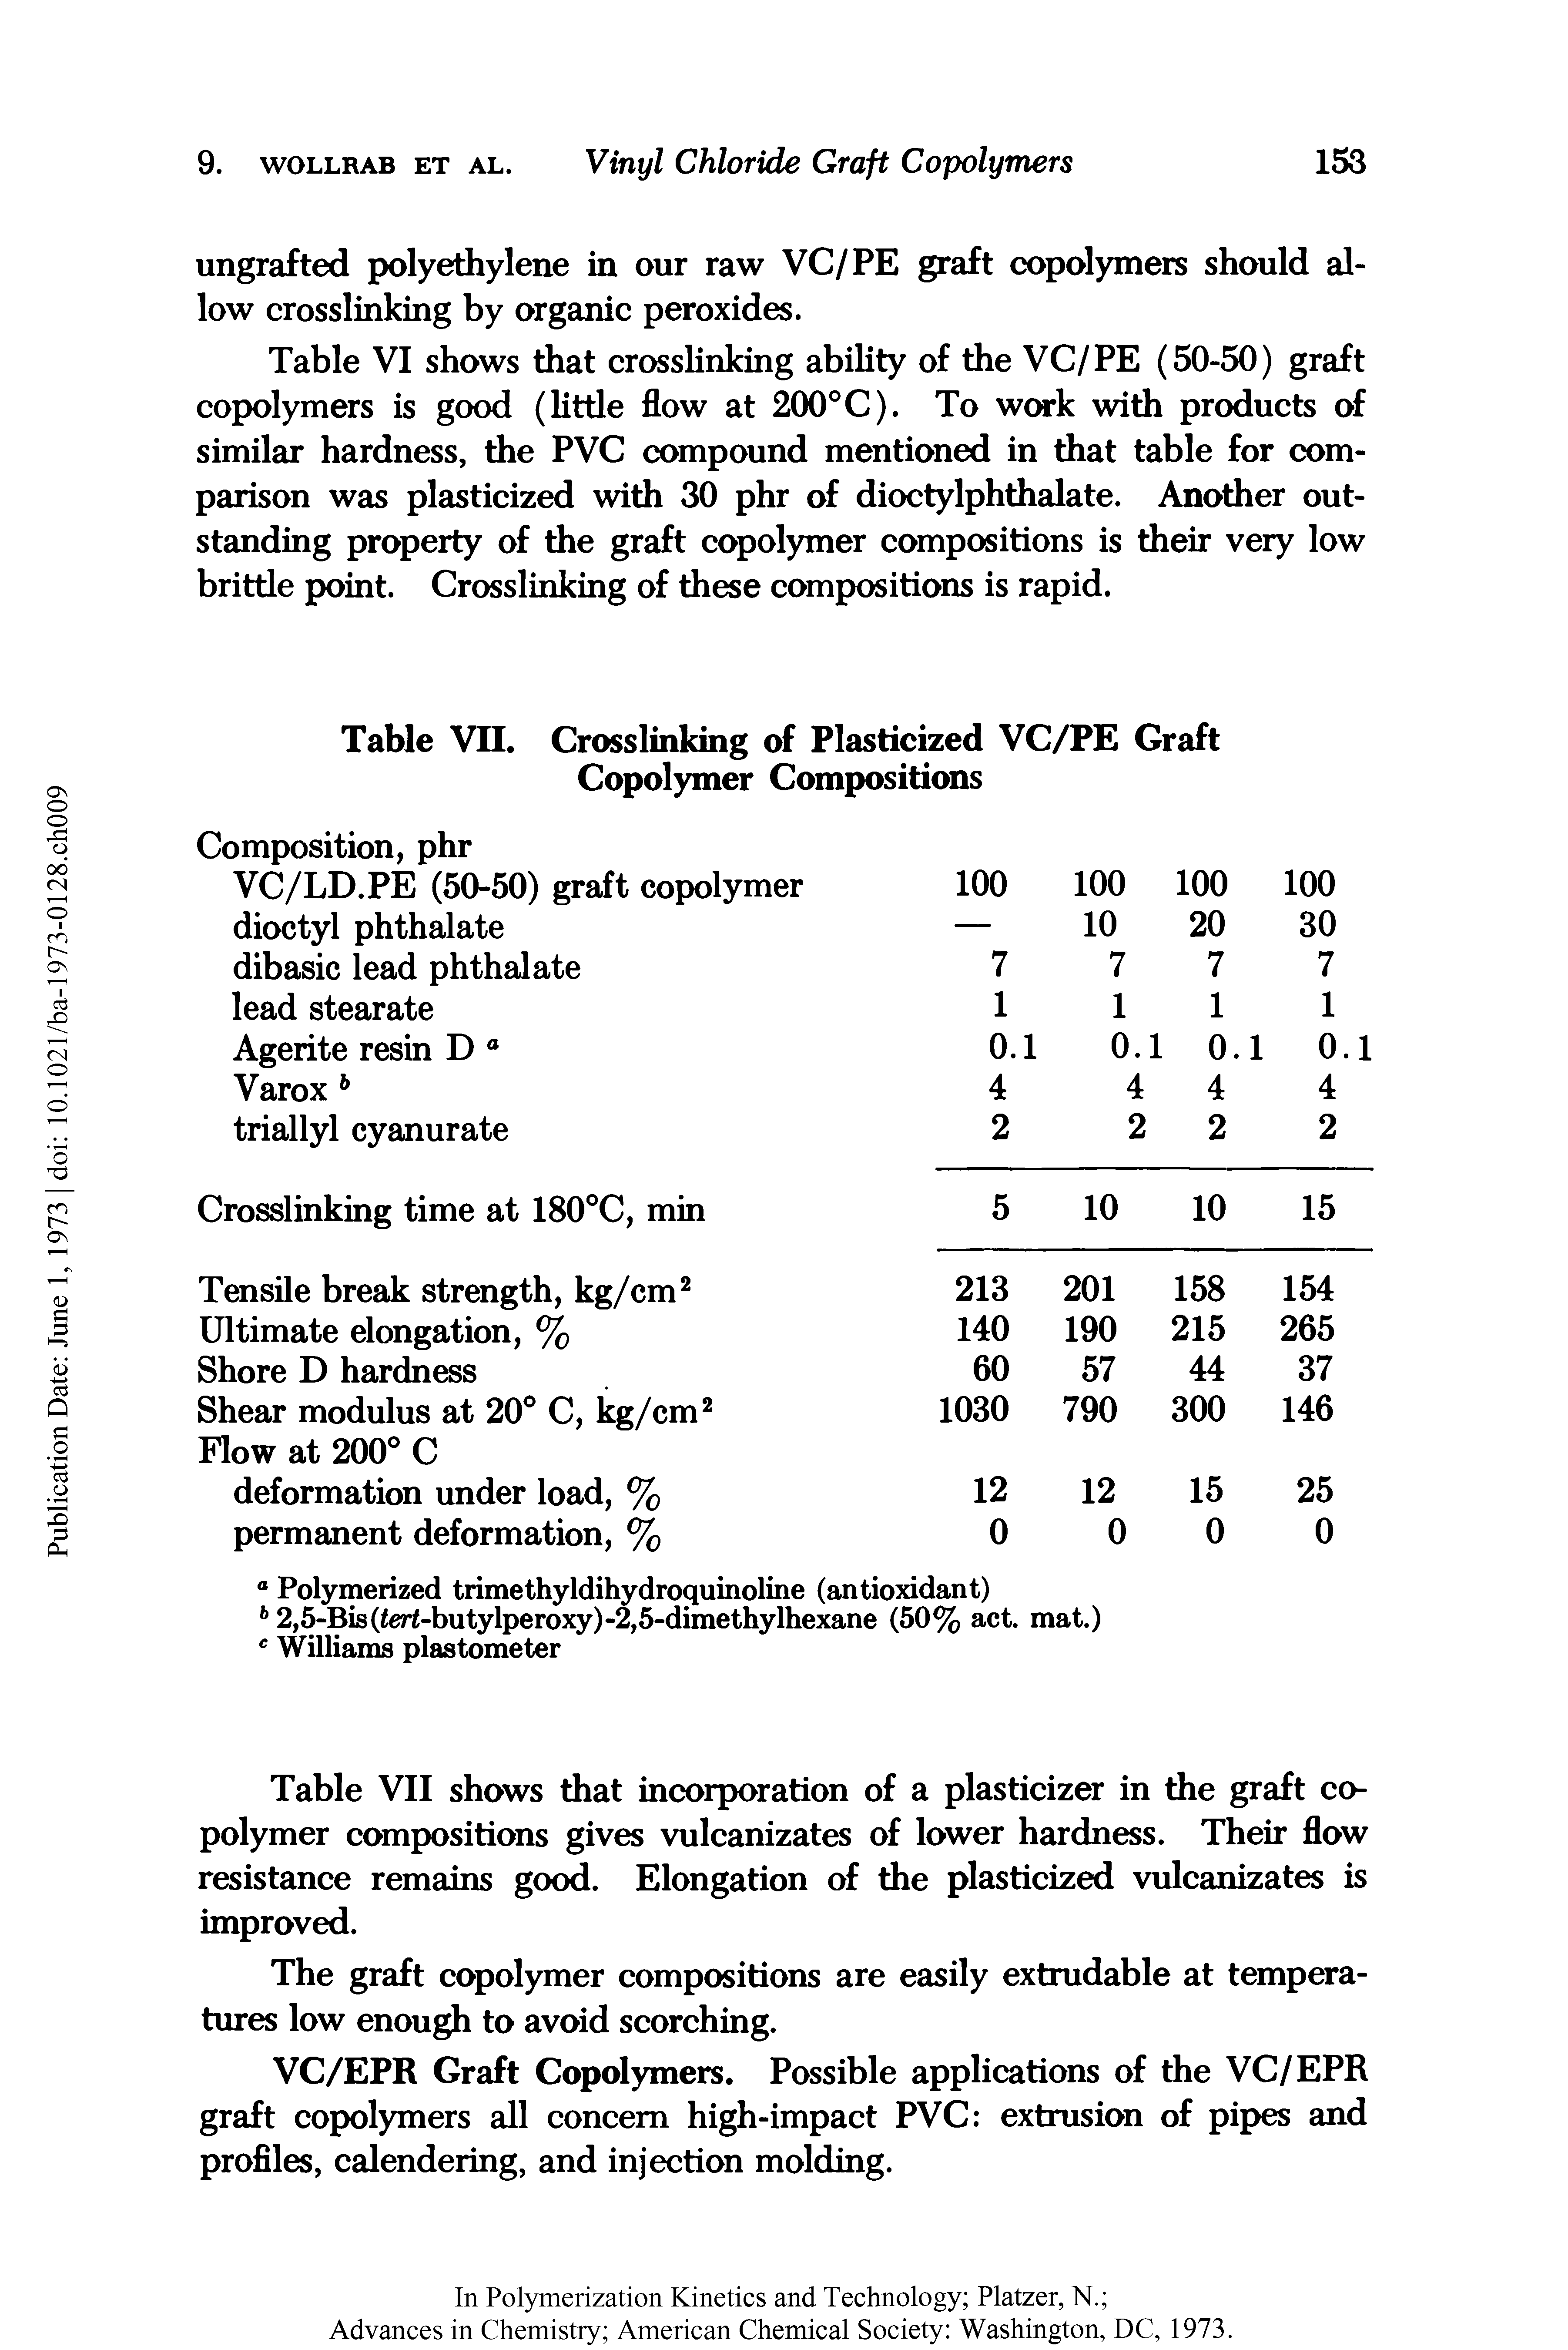 Table VII. Crosslinking of Plasticized VC/PE Graft Copolymer Compositions...